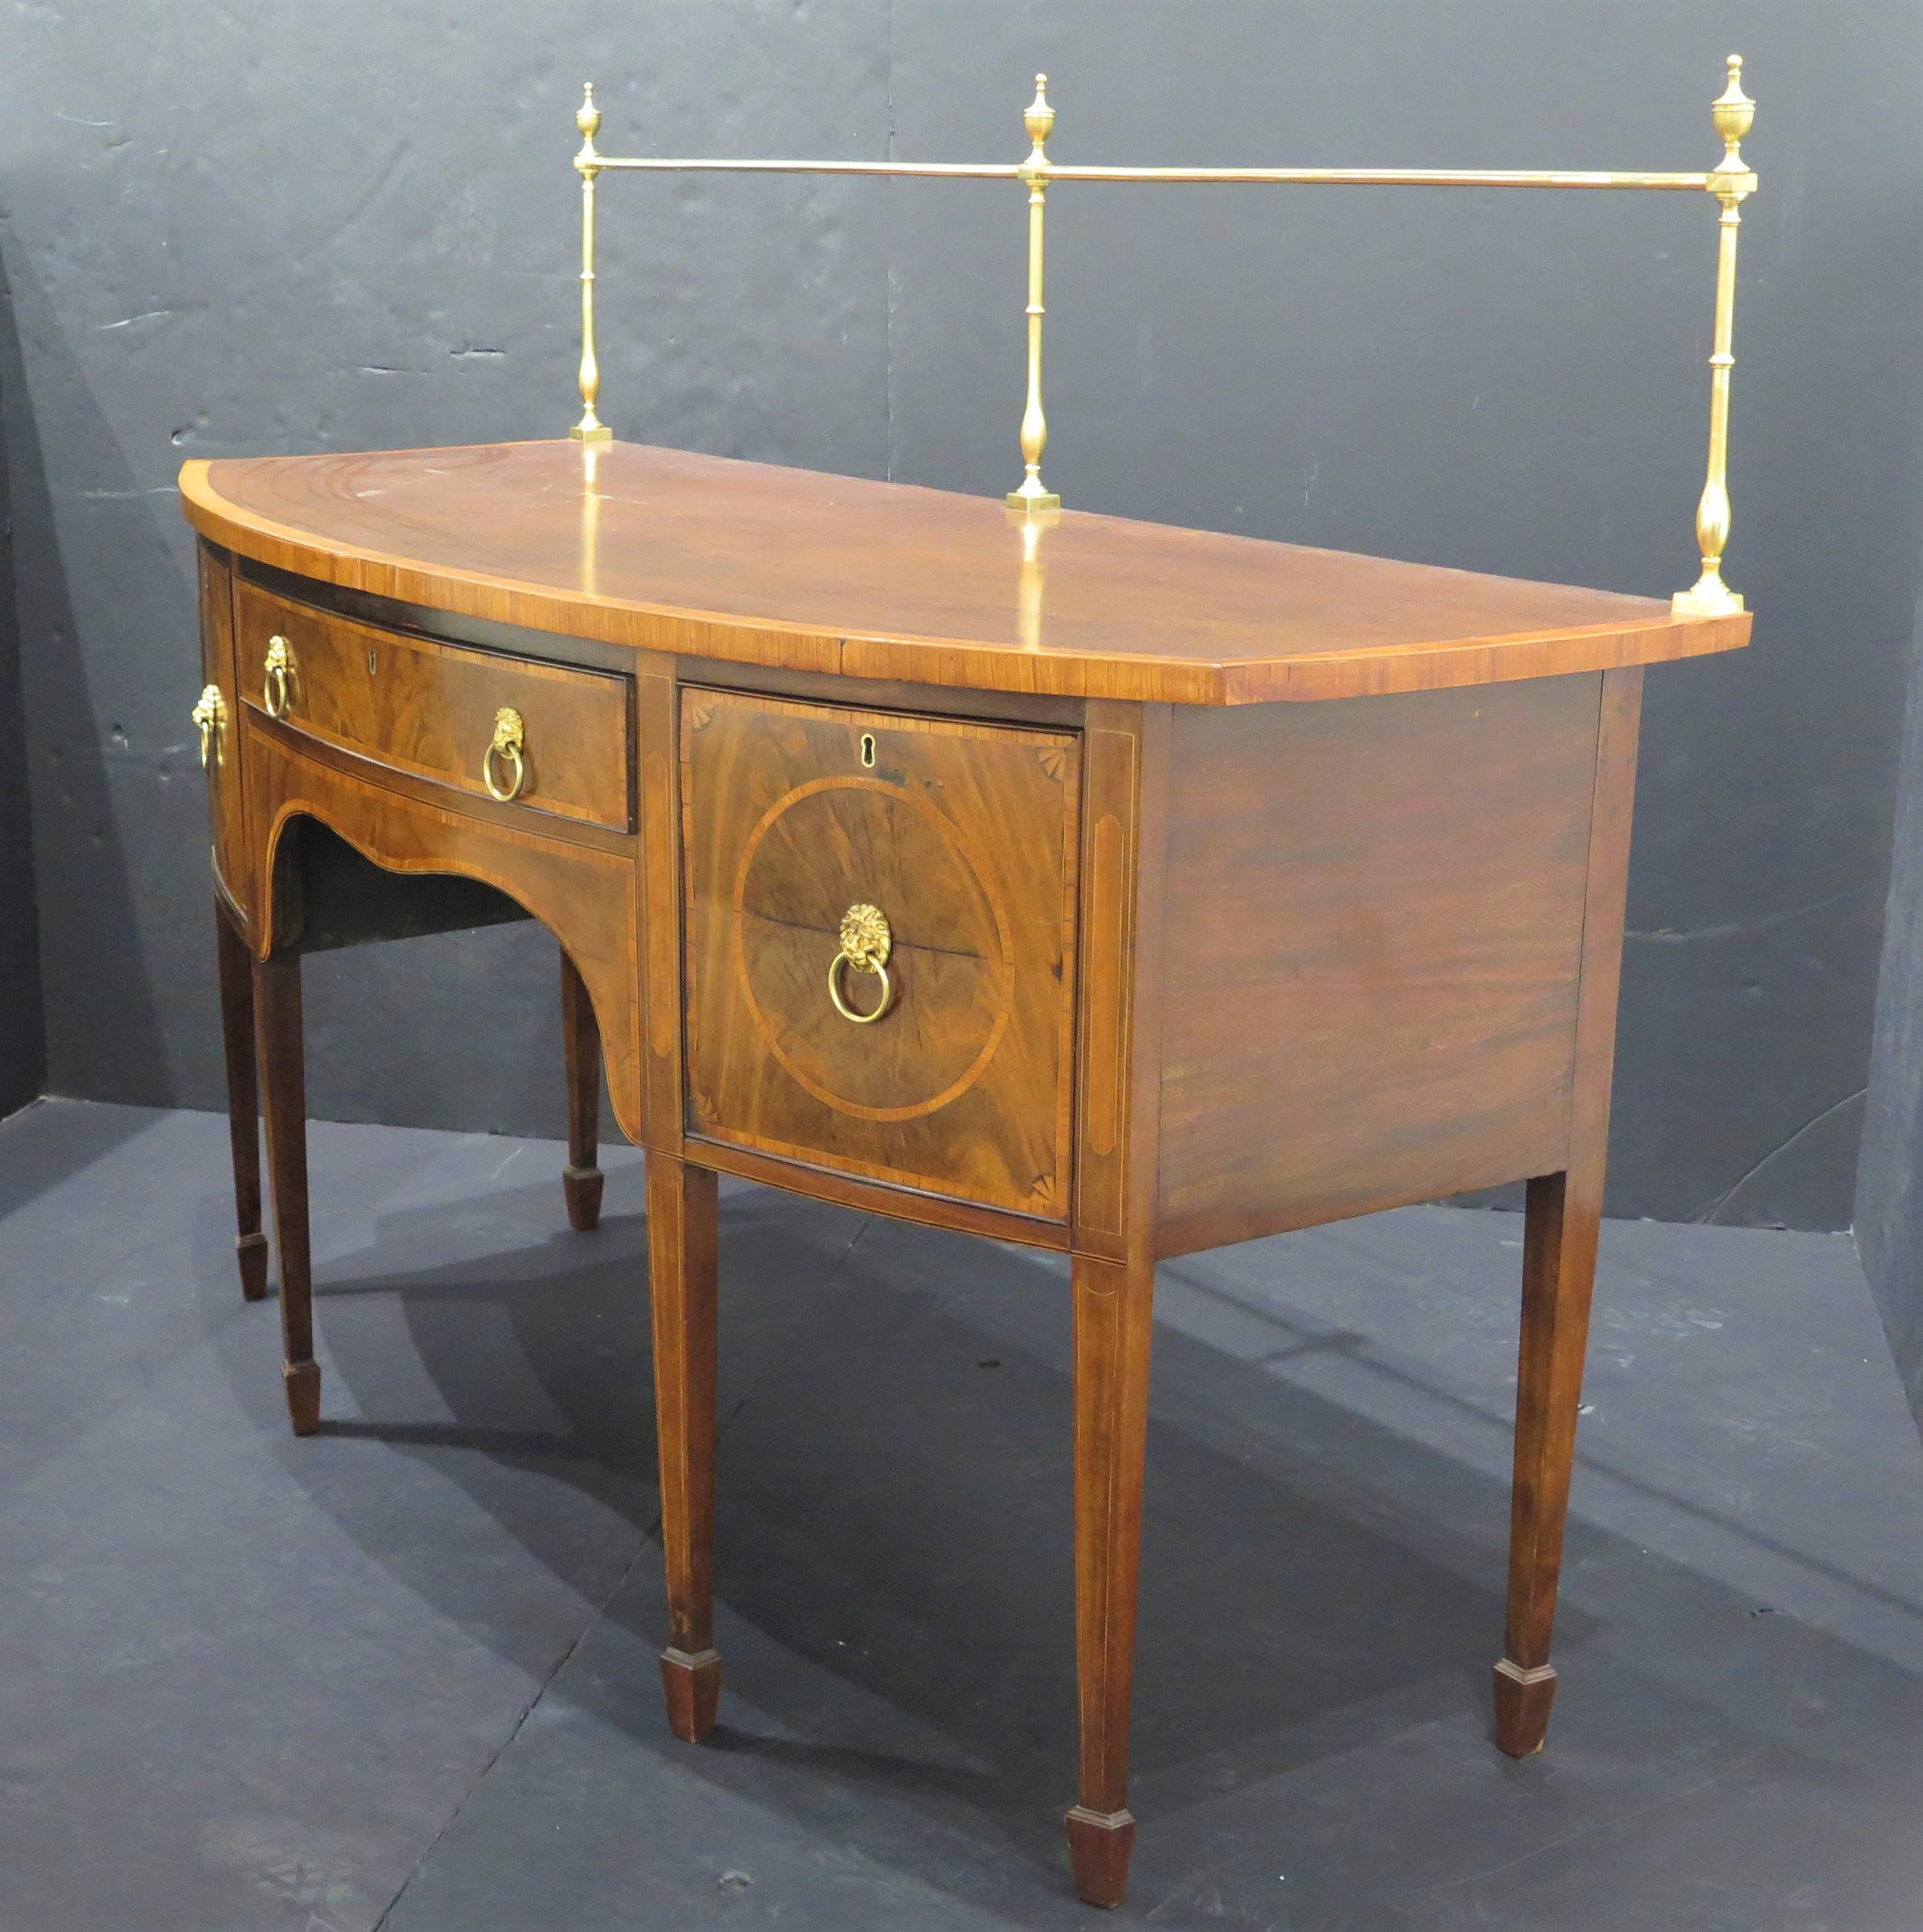 George III English inlaid mahogany Hepplewhite-style sideboard / server, banded bow front top with split down center, over conforming base with long center split down center by two deep drawers, raised on square tapered pencil legs banded and string